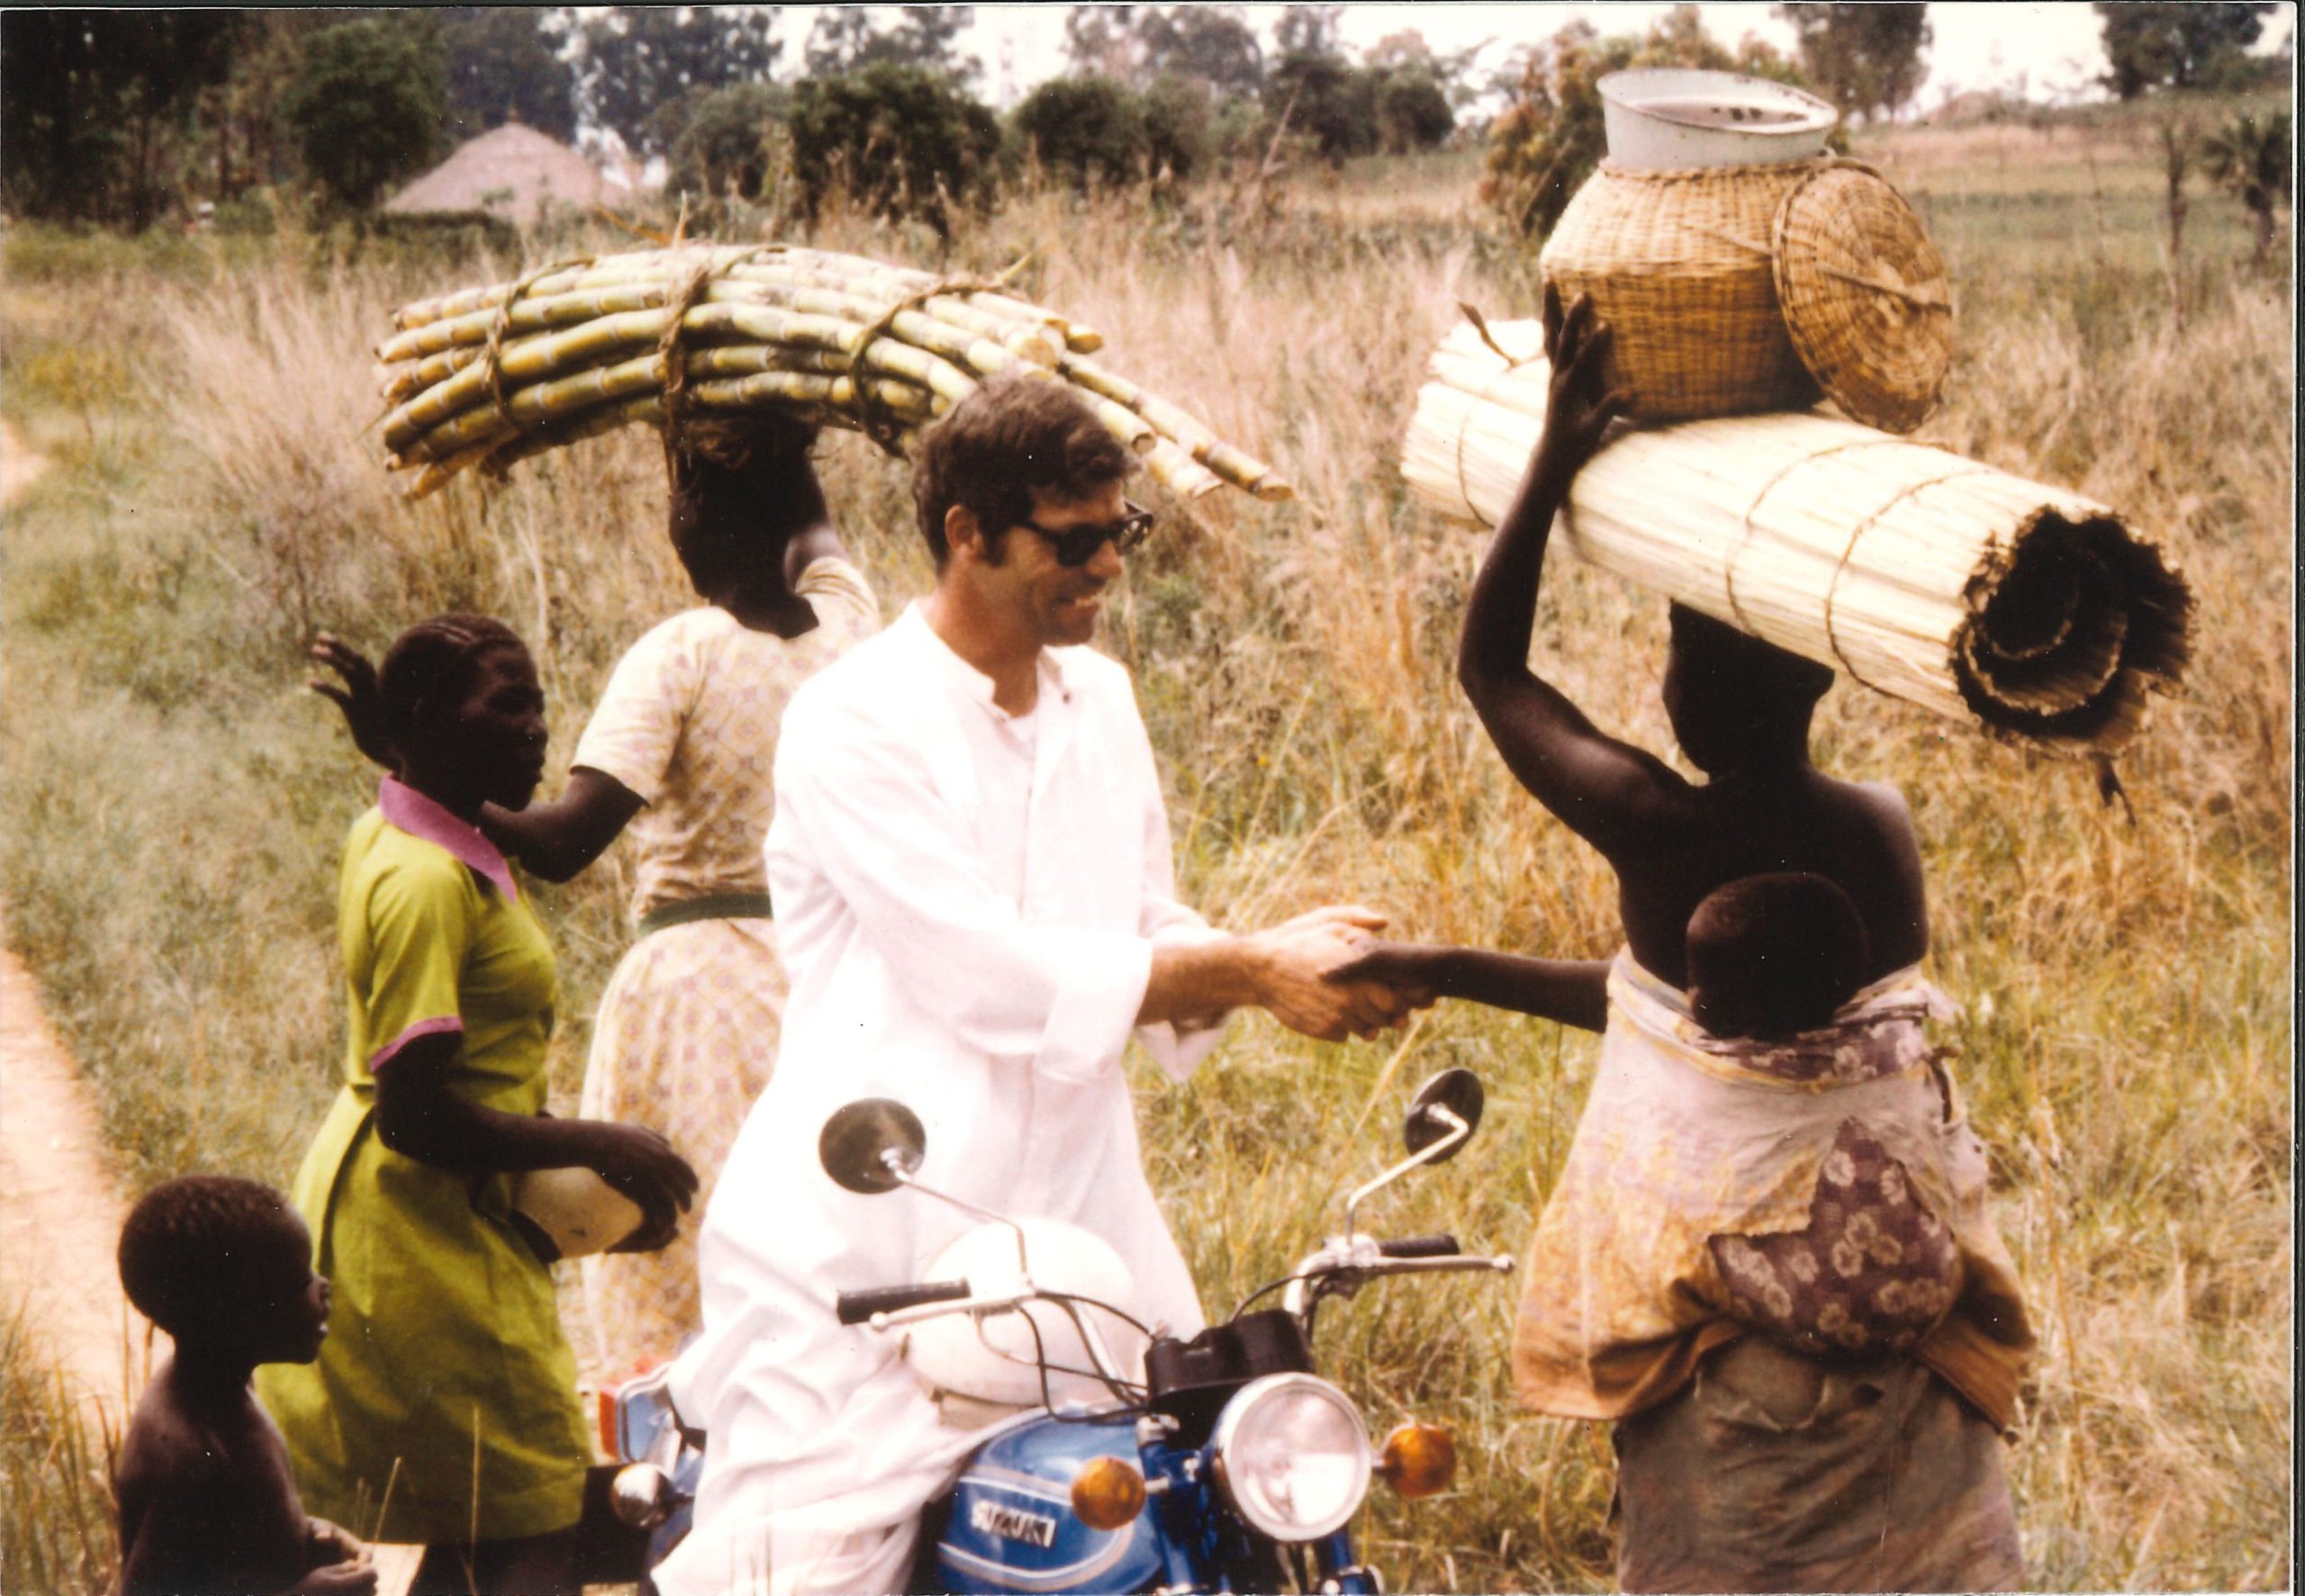 A young Fr David Baltz wearing the traditional white priest alb sits on a motorcyle. he is greeting young women walking along the rode as they carry jars and sugarcane on their heads